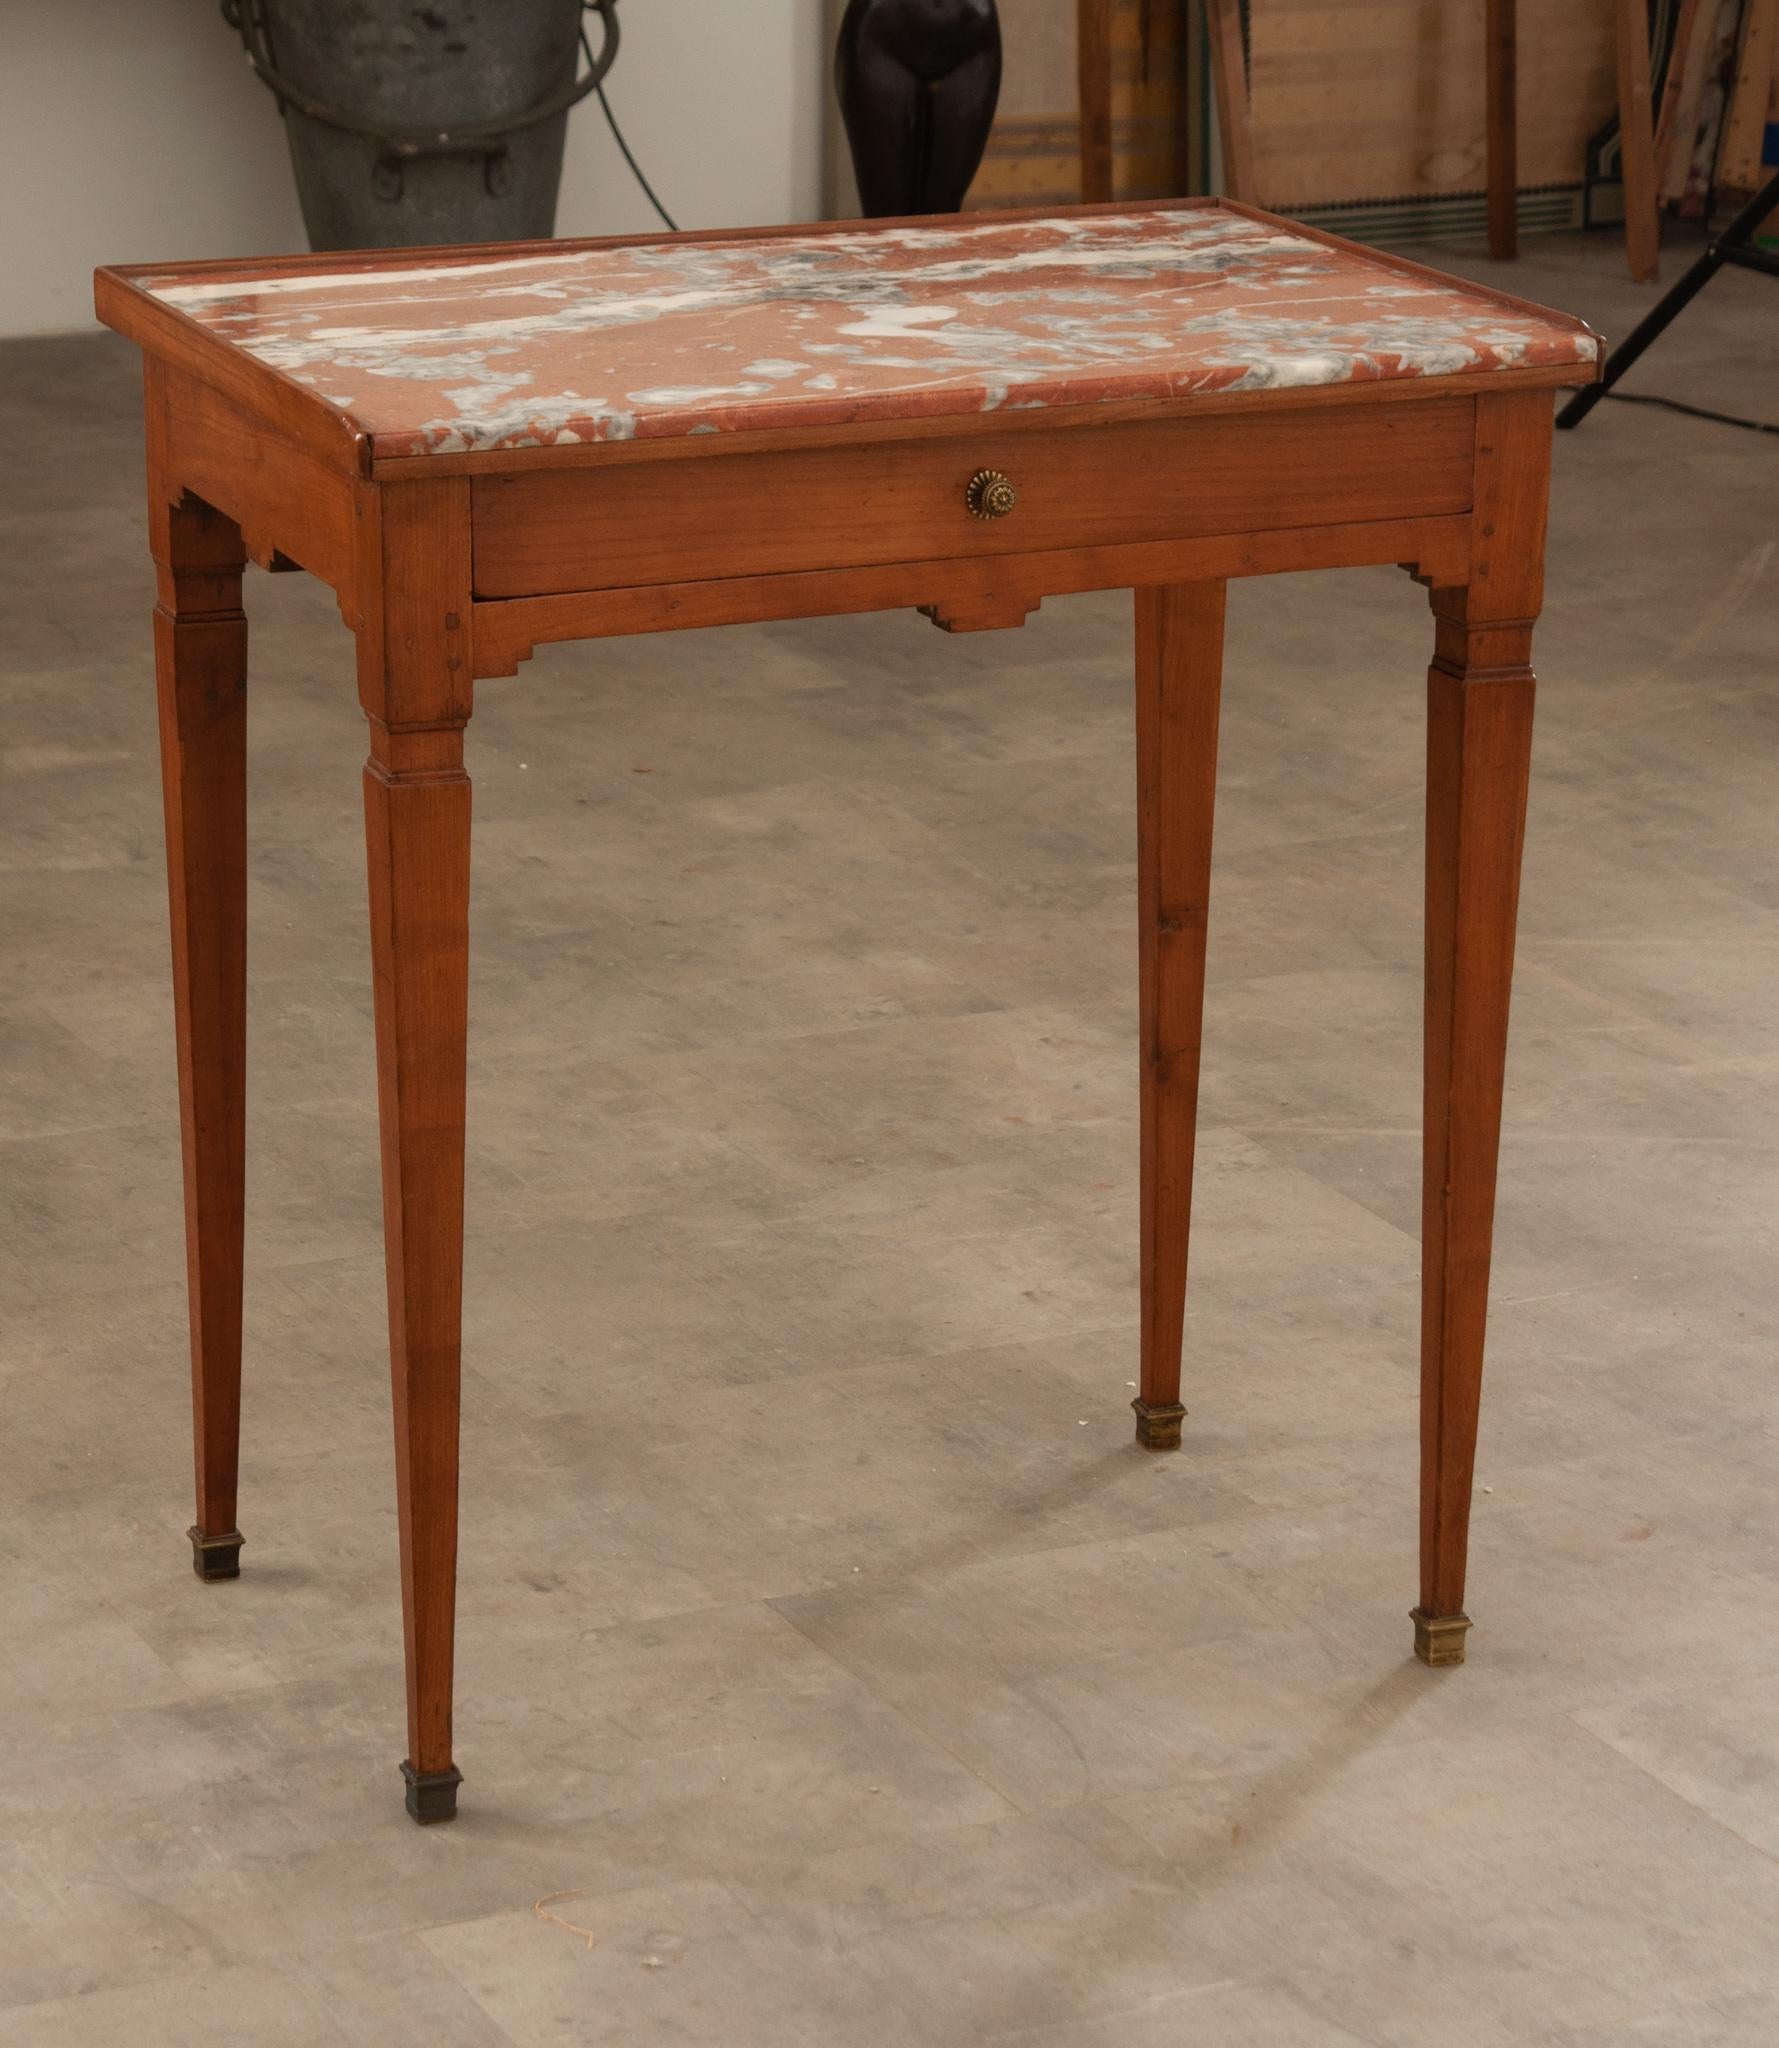 This fruitwood occasional table is topped with an inset piece of stunning red Rosso Francia marble and surrounded by a 3/4th gallery over an apron with a single drawer. The drawer contains a non-removable divider to help keep those small things